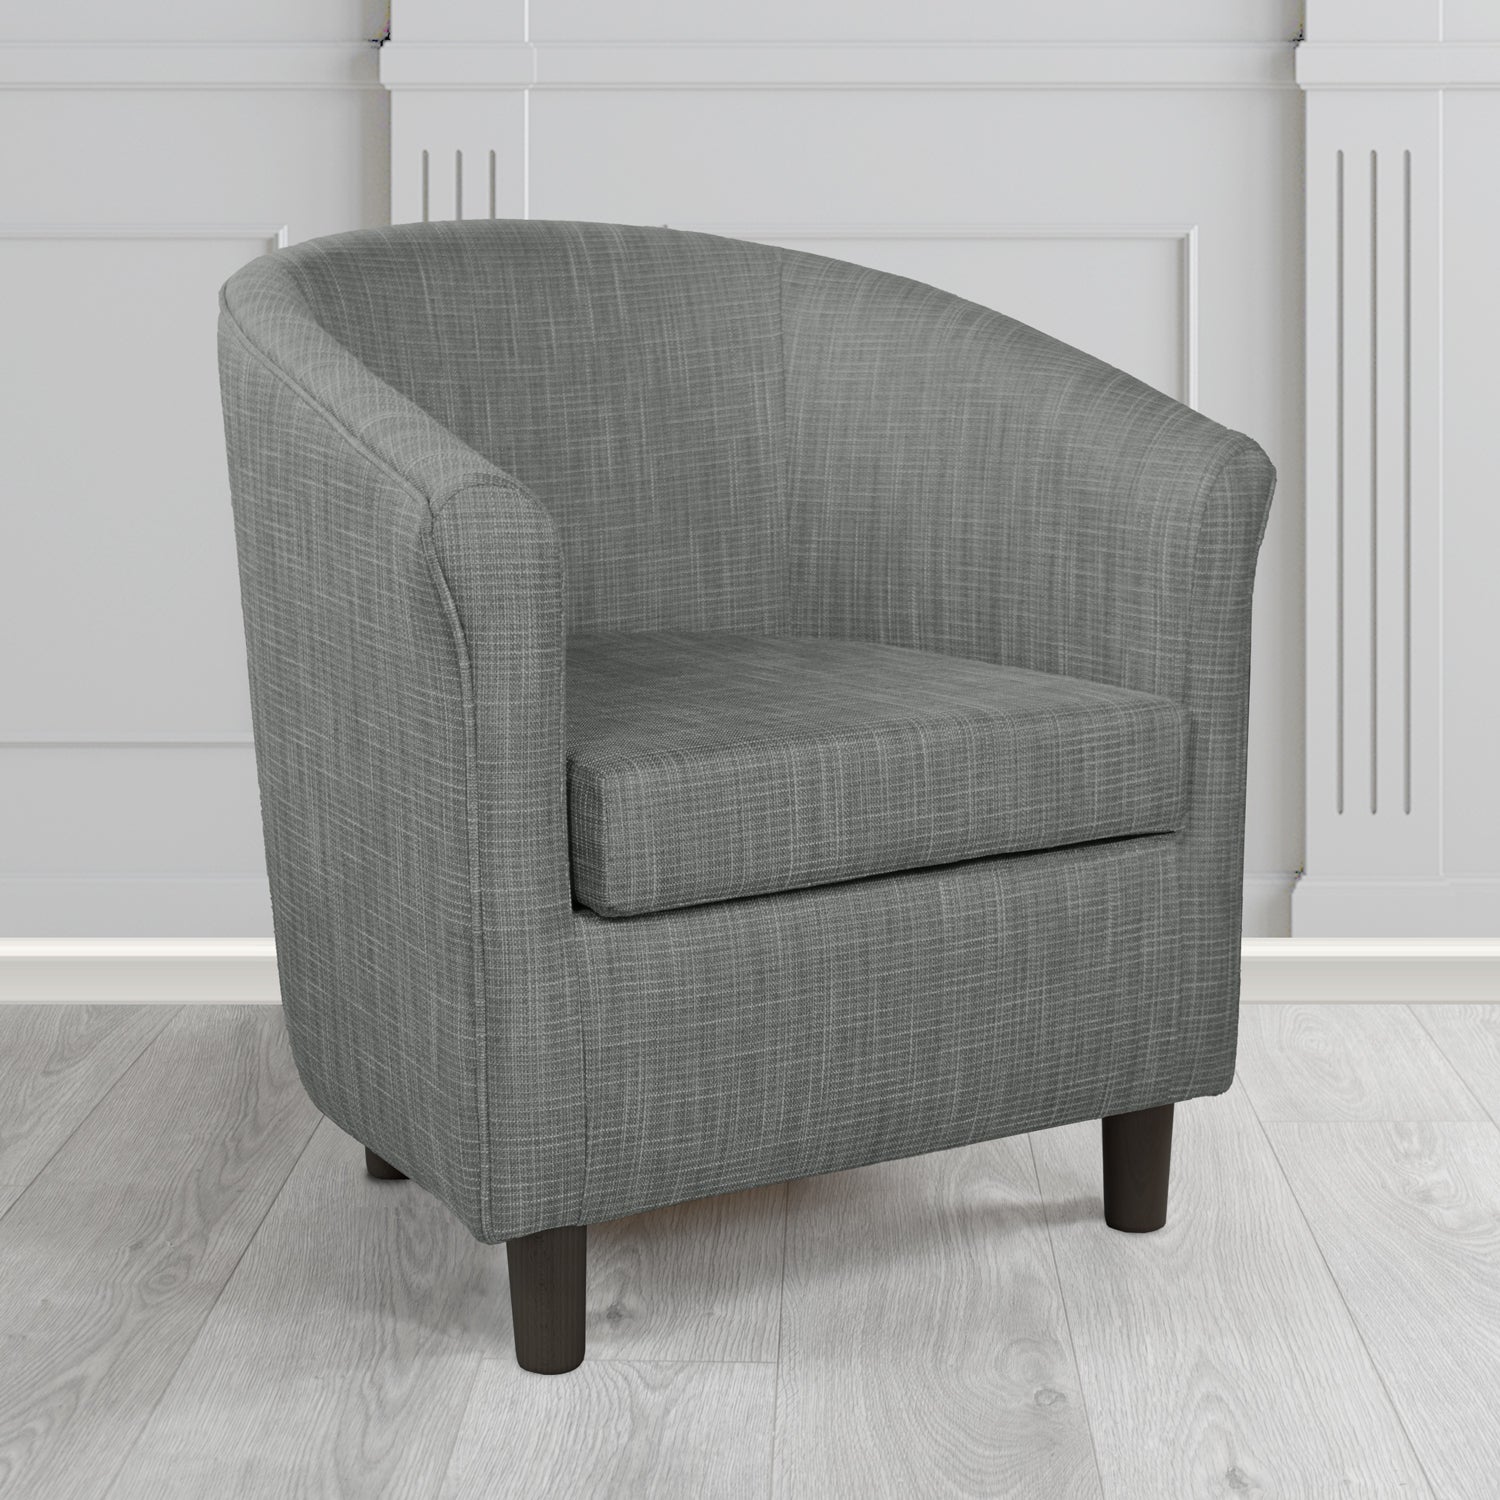 Tuscany Ravel Zinc Contract Crib 5 Fabric Tub Chair - Antimicrobial & Water-Resistant - The Tub Chair Shop